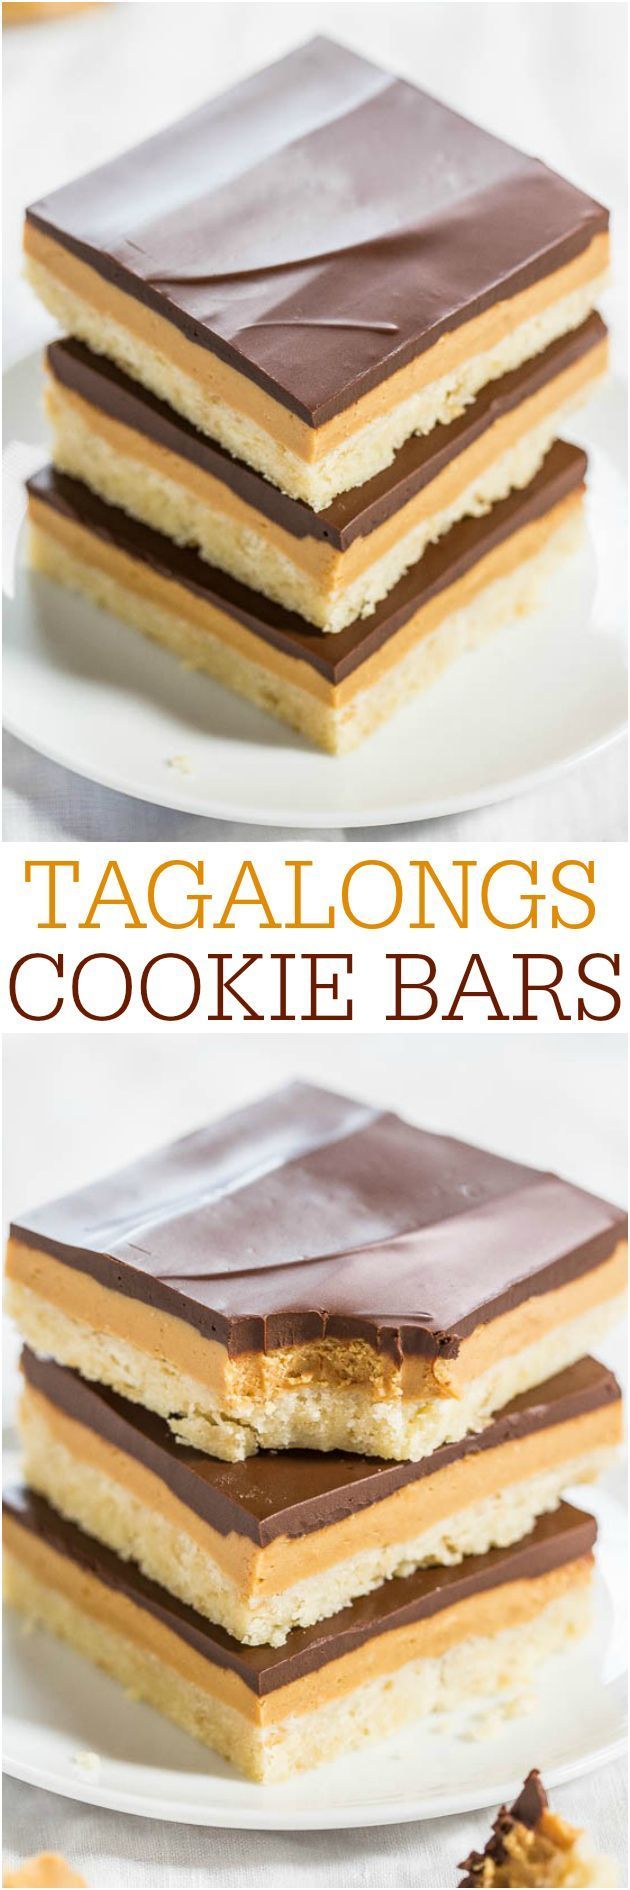 Tagalongs Cookie Bars – Say hello to year-round Girl Scout Cookie Season with these delish bars! All the flavors of the classic